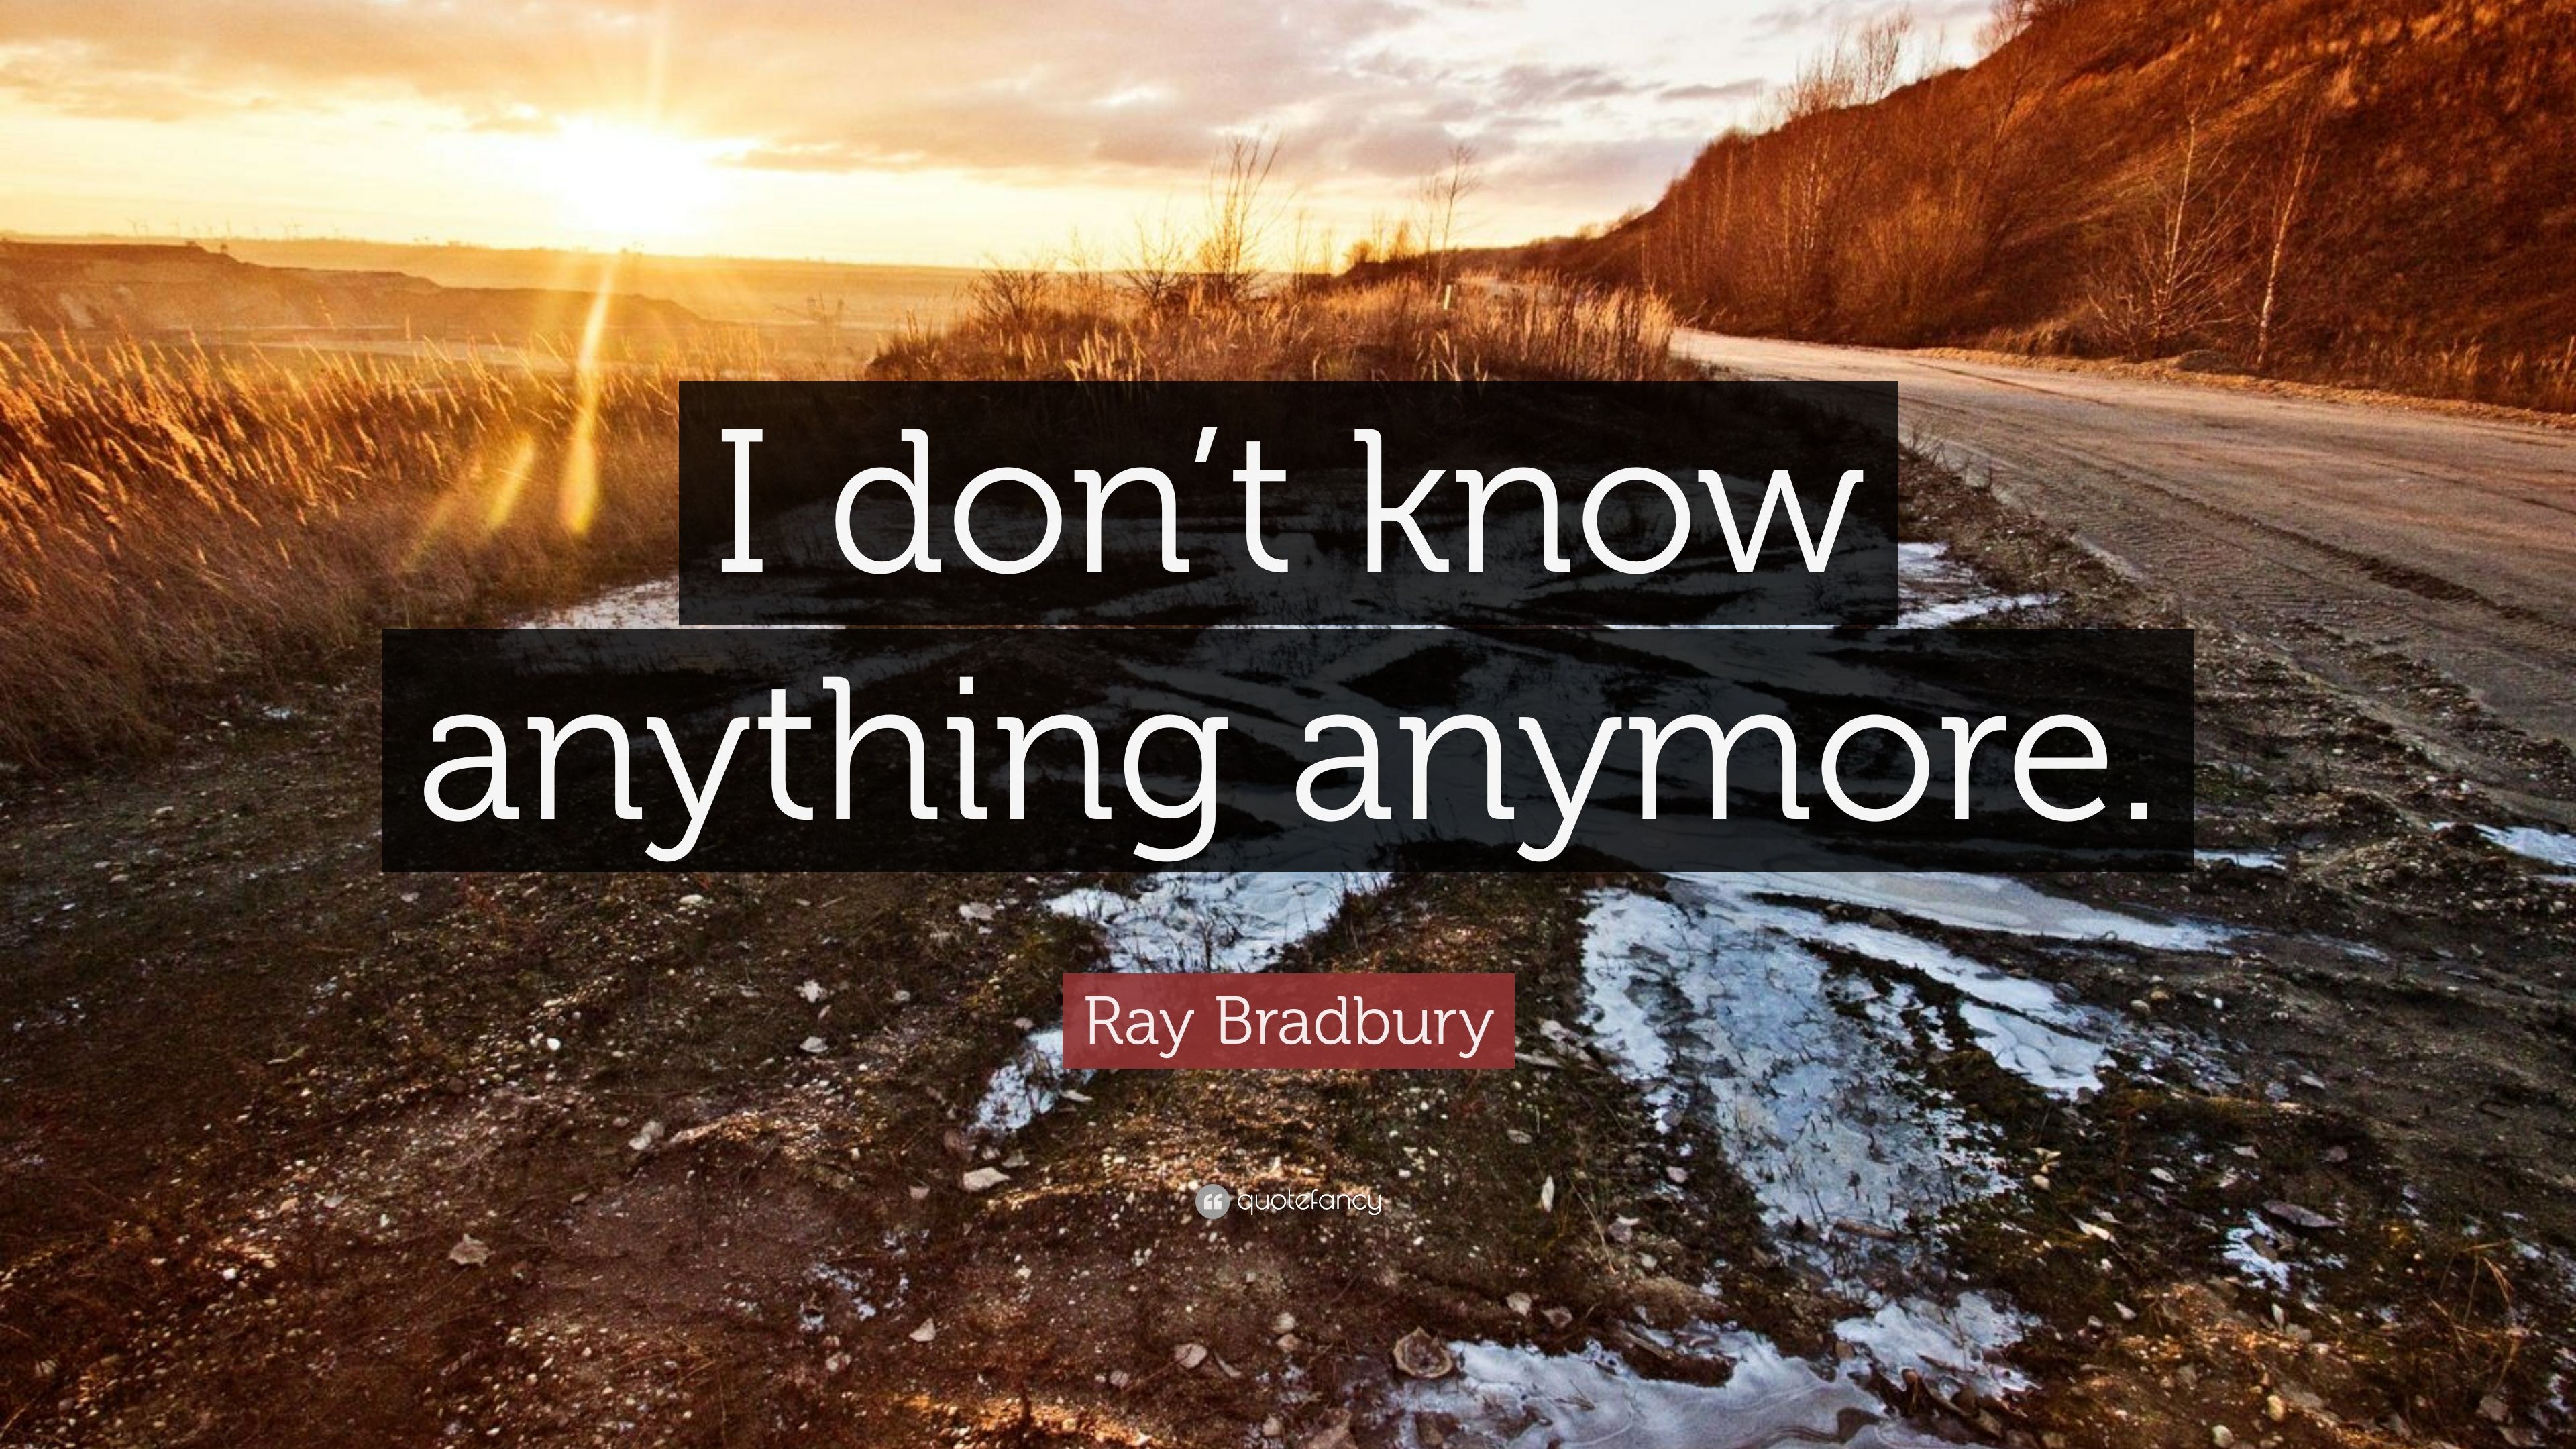 Ray Bradbury Quote: “I don't know anything anymore.” 10